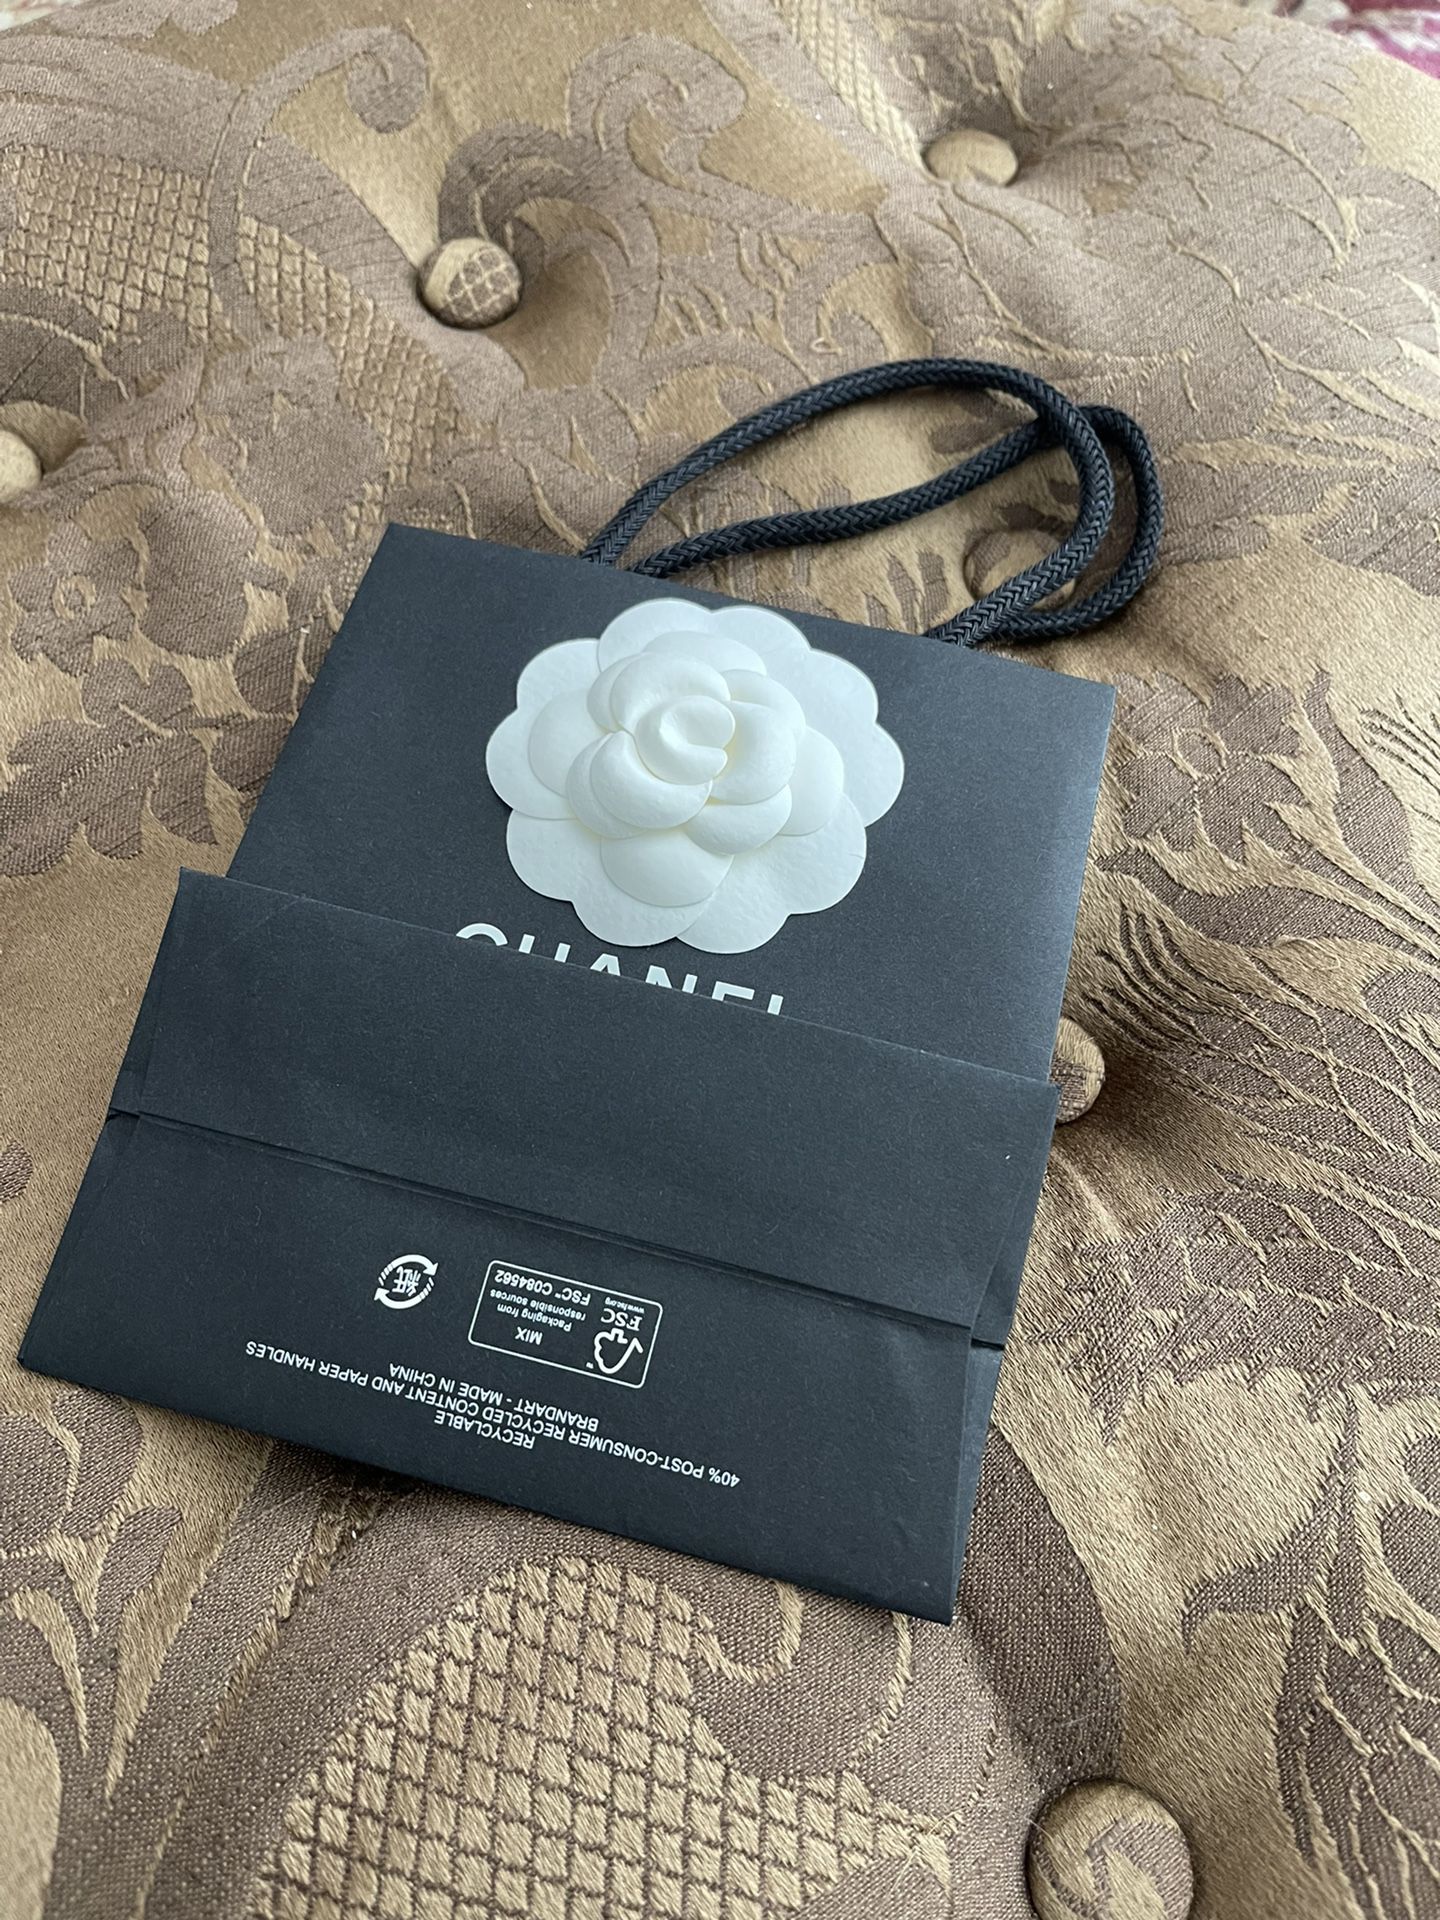 Brand new small size Chanel shopping bag size 6.25x5.5x3.25 inches, perfect for a small wallet, jewelry or cosmetics